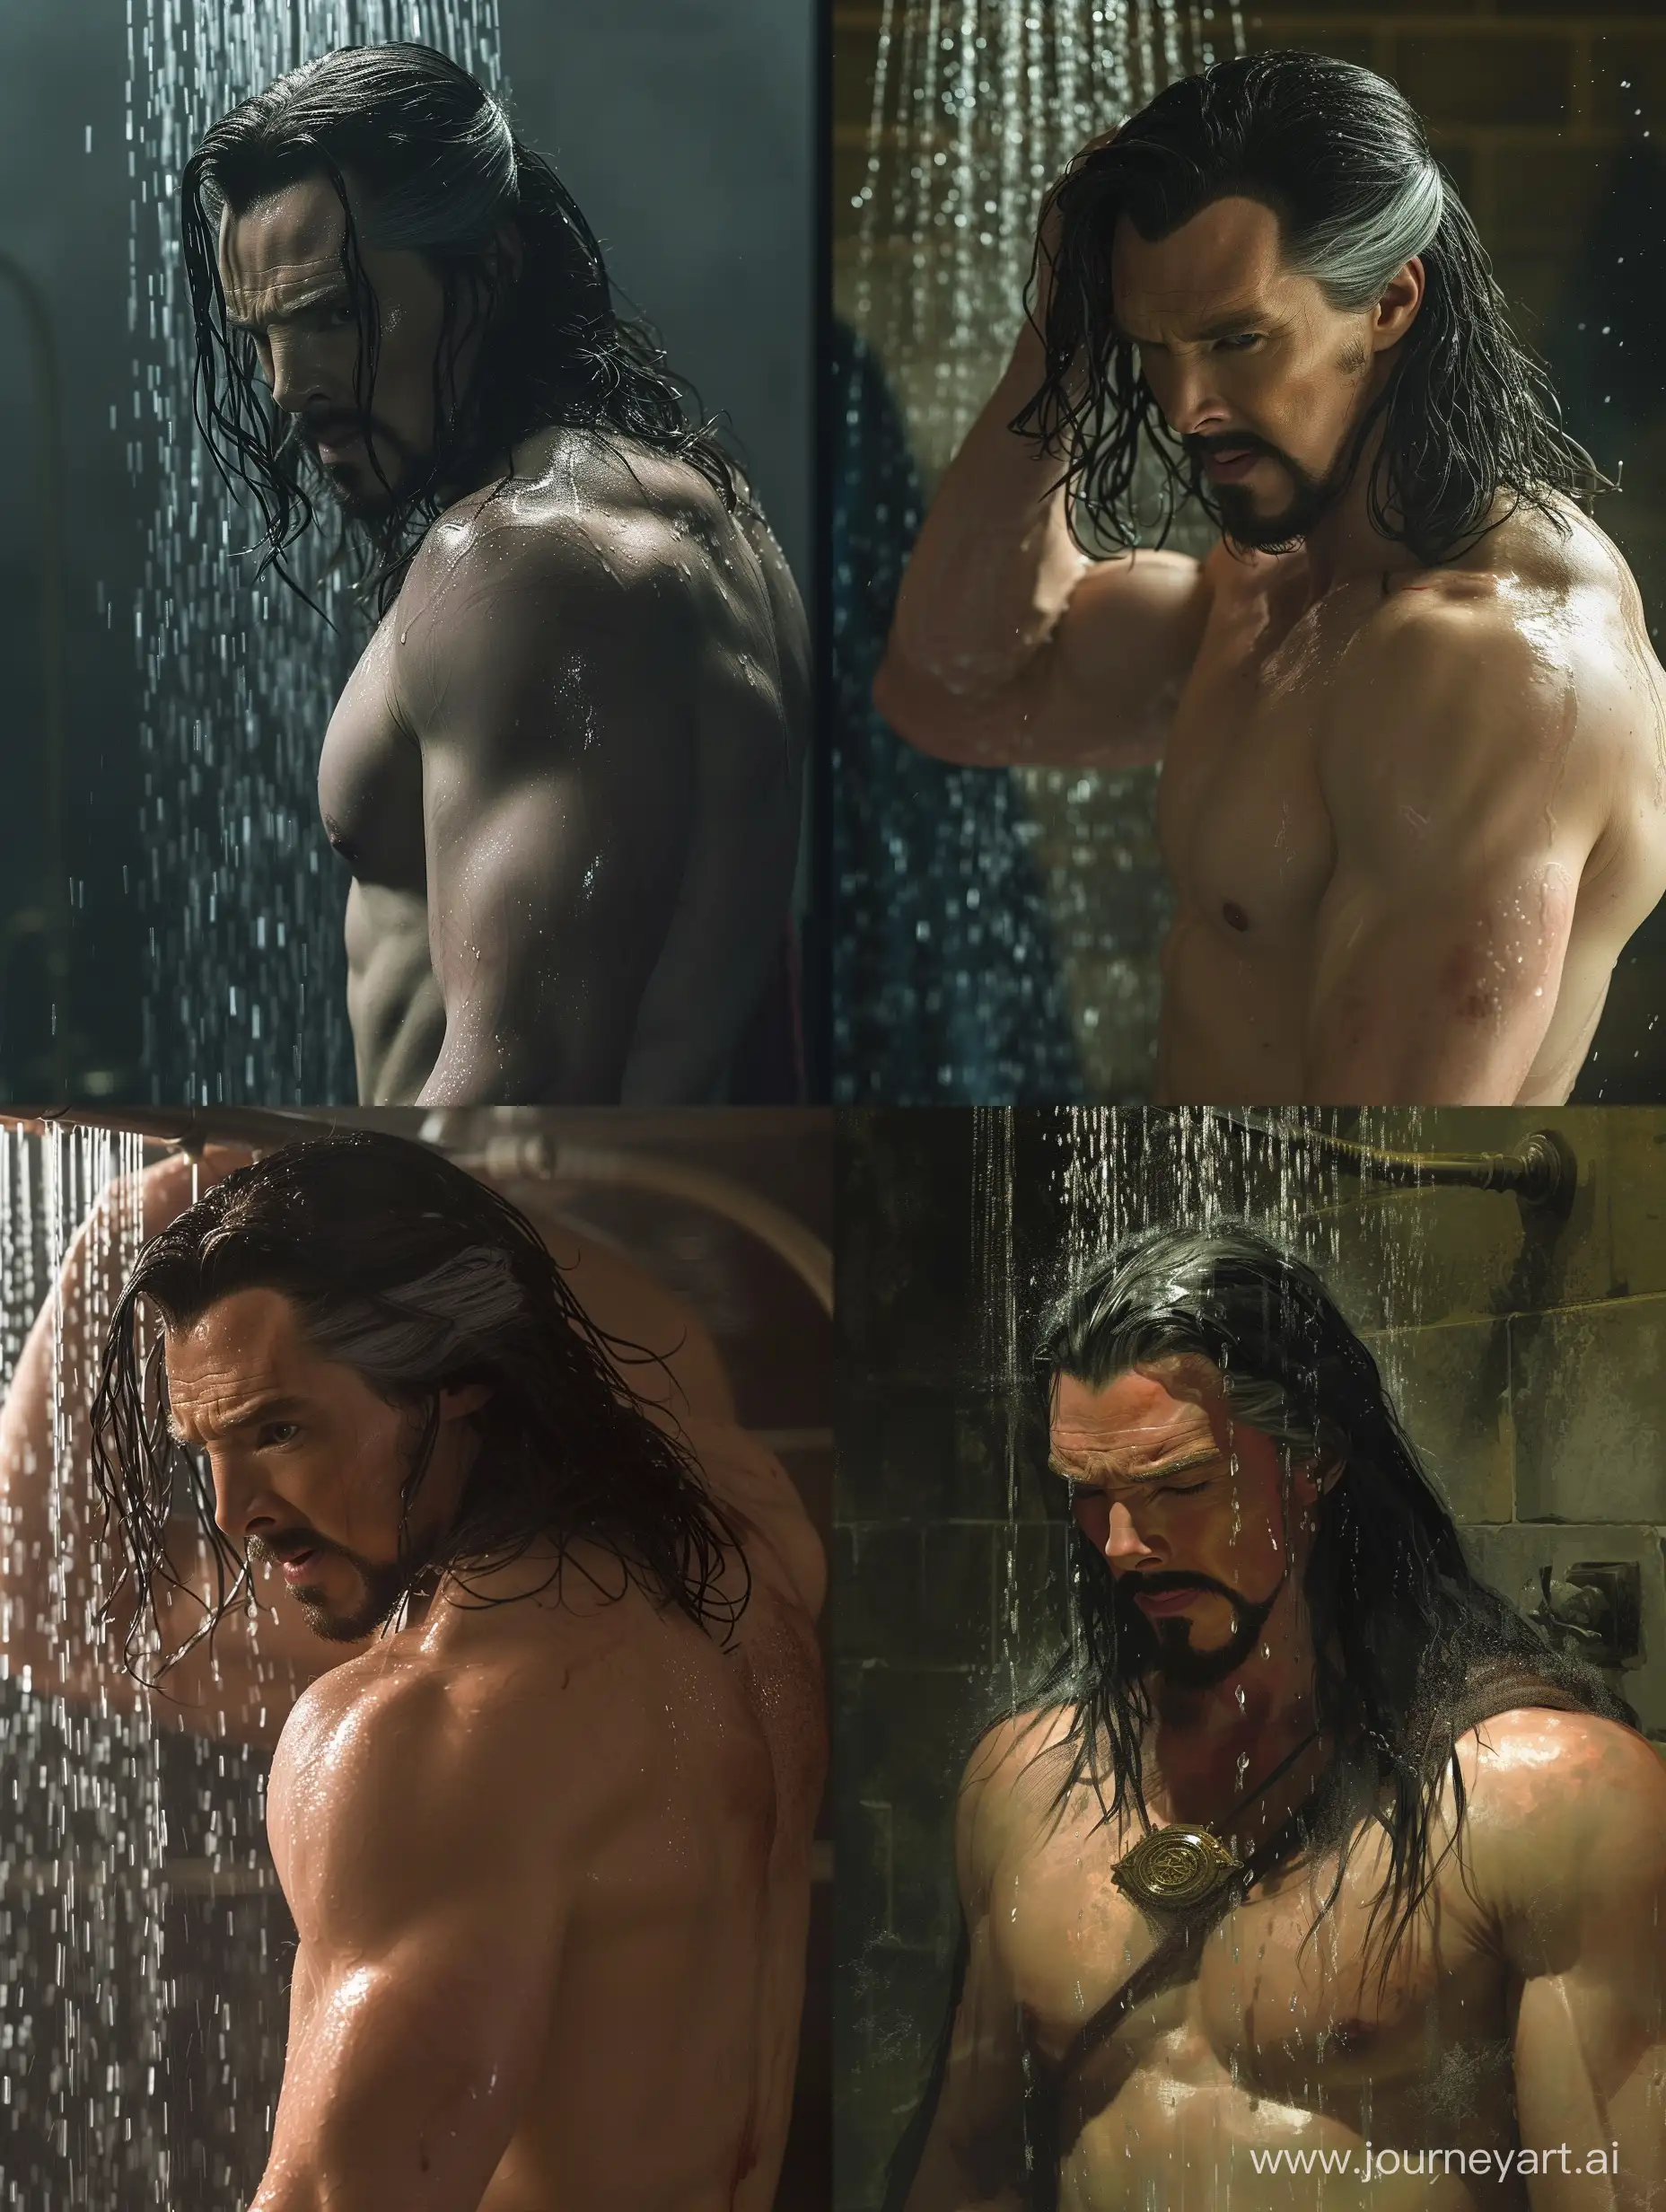 Shirtless-Doctor-Strange-with-Long-Hair-Taking-a-Shower